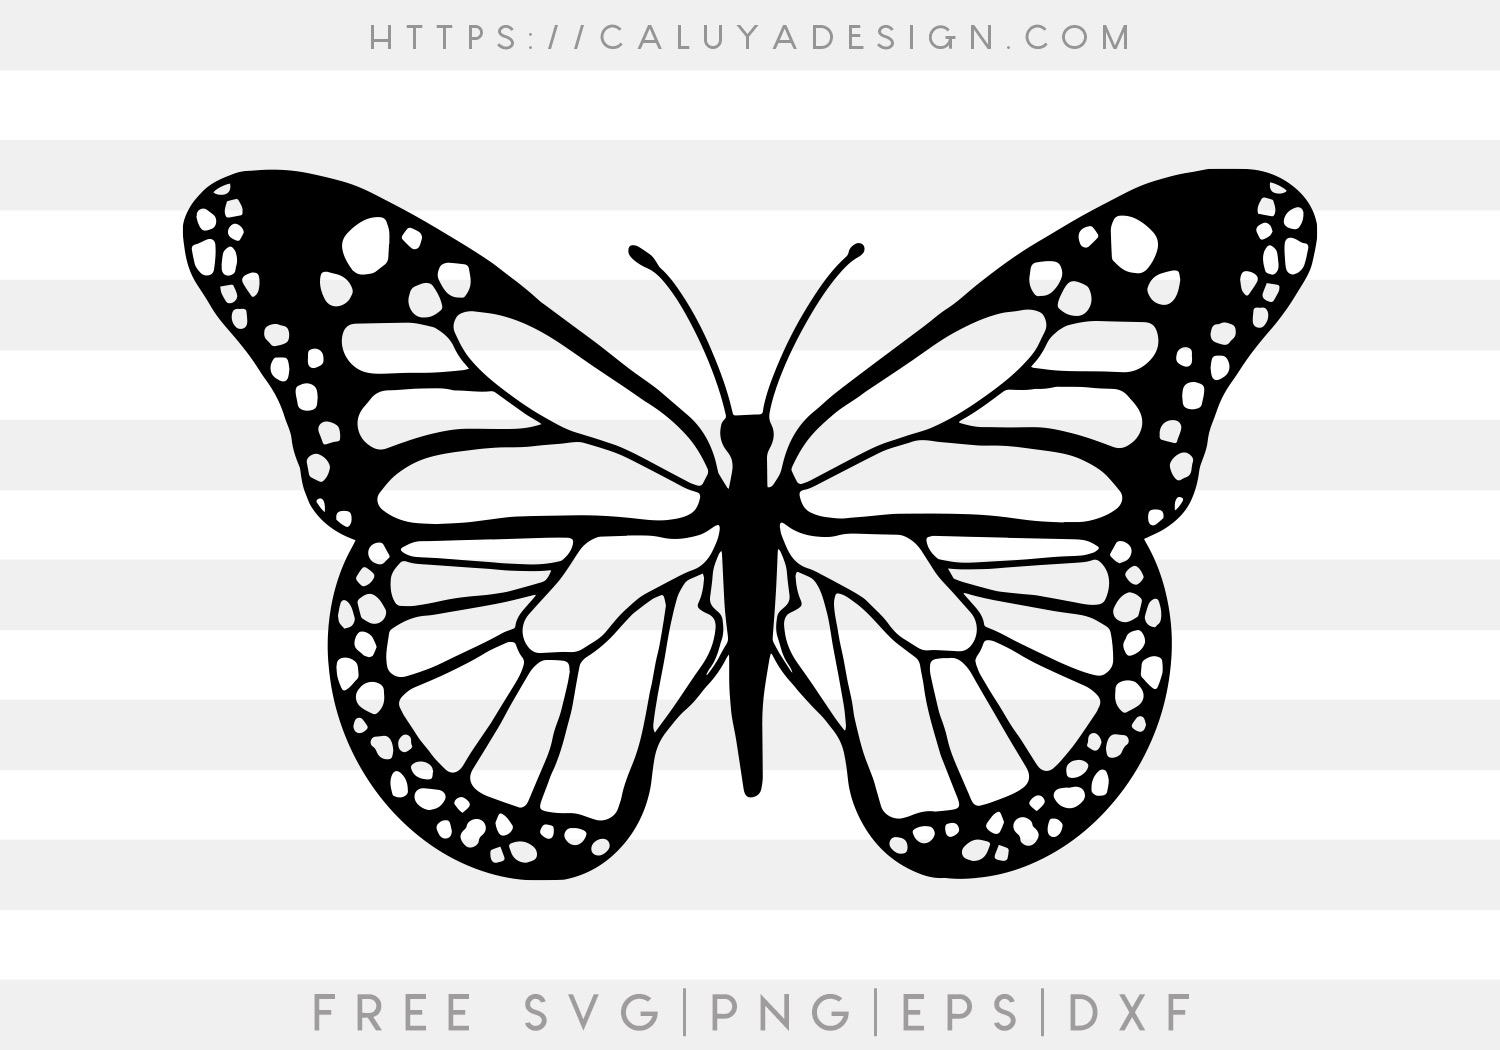 Free Handdrawn Butterfly SVG, PNG, EPS & DXF by Caluya Design